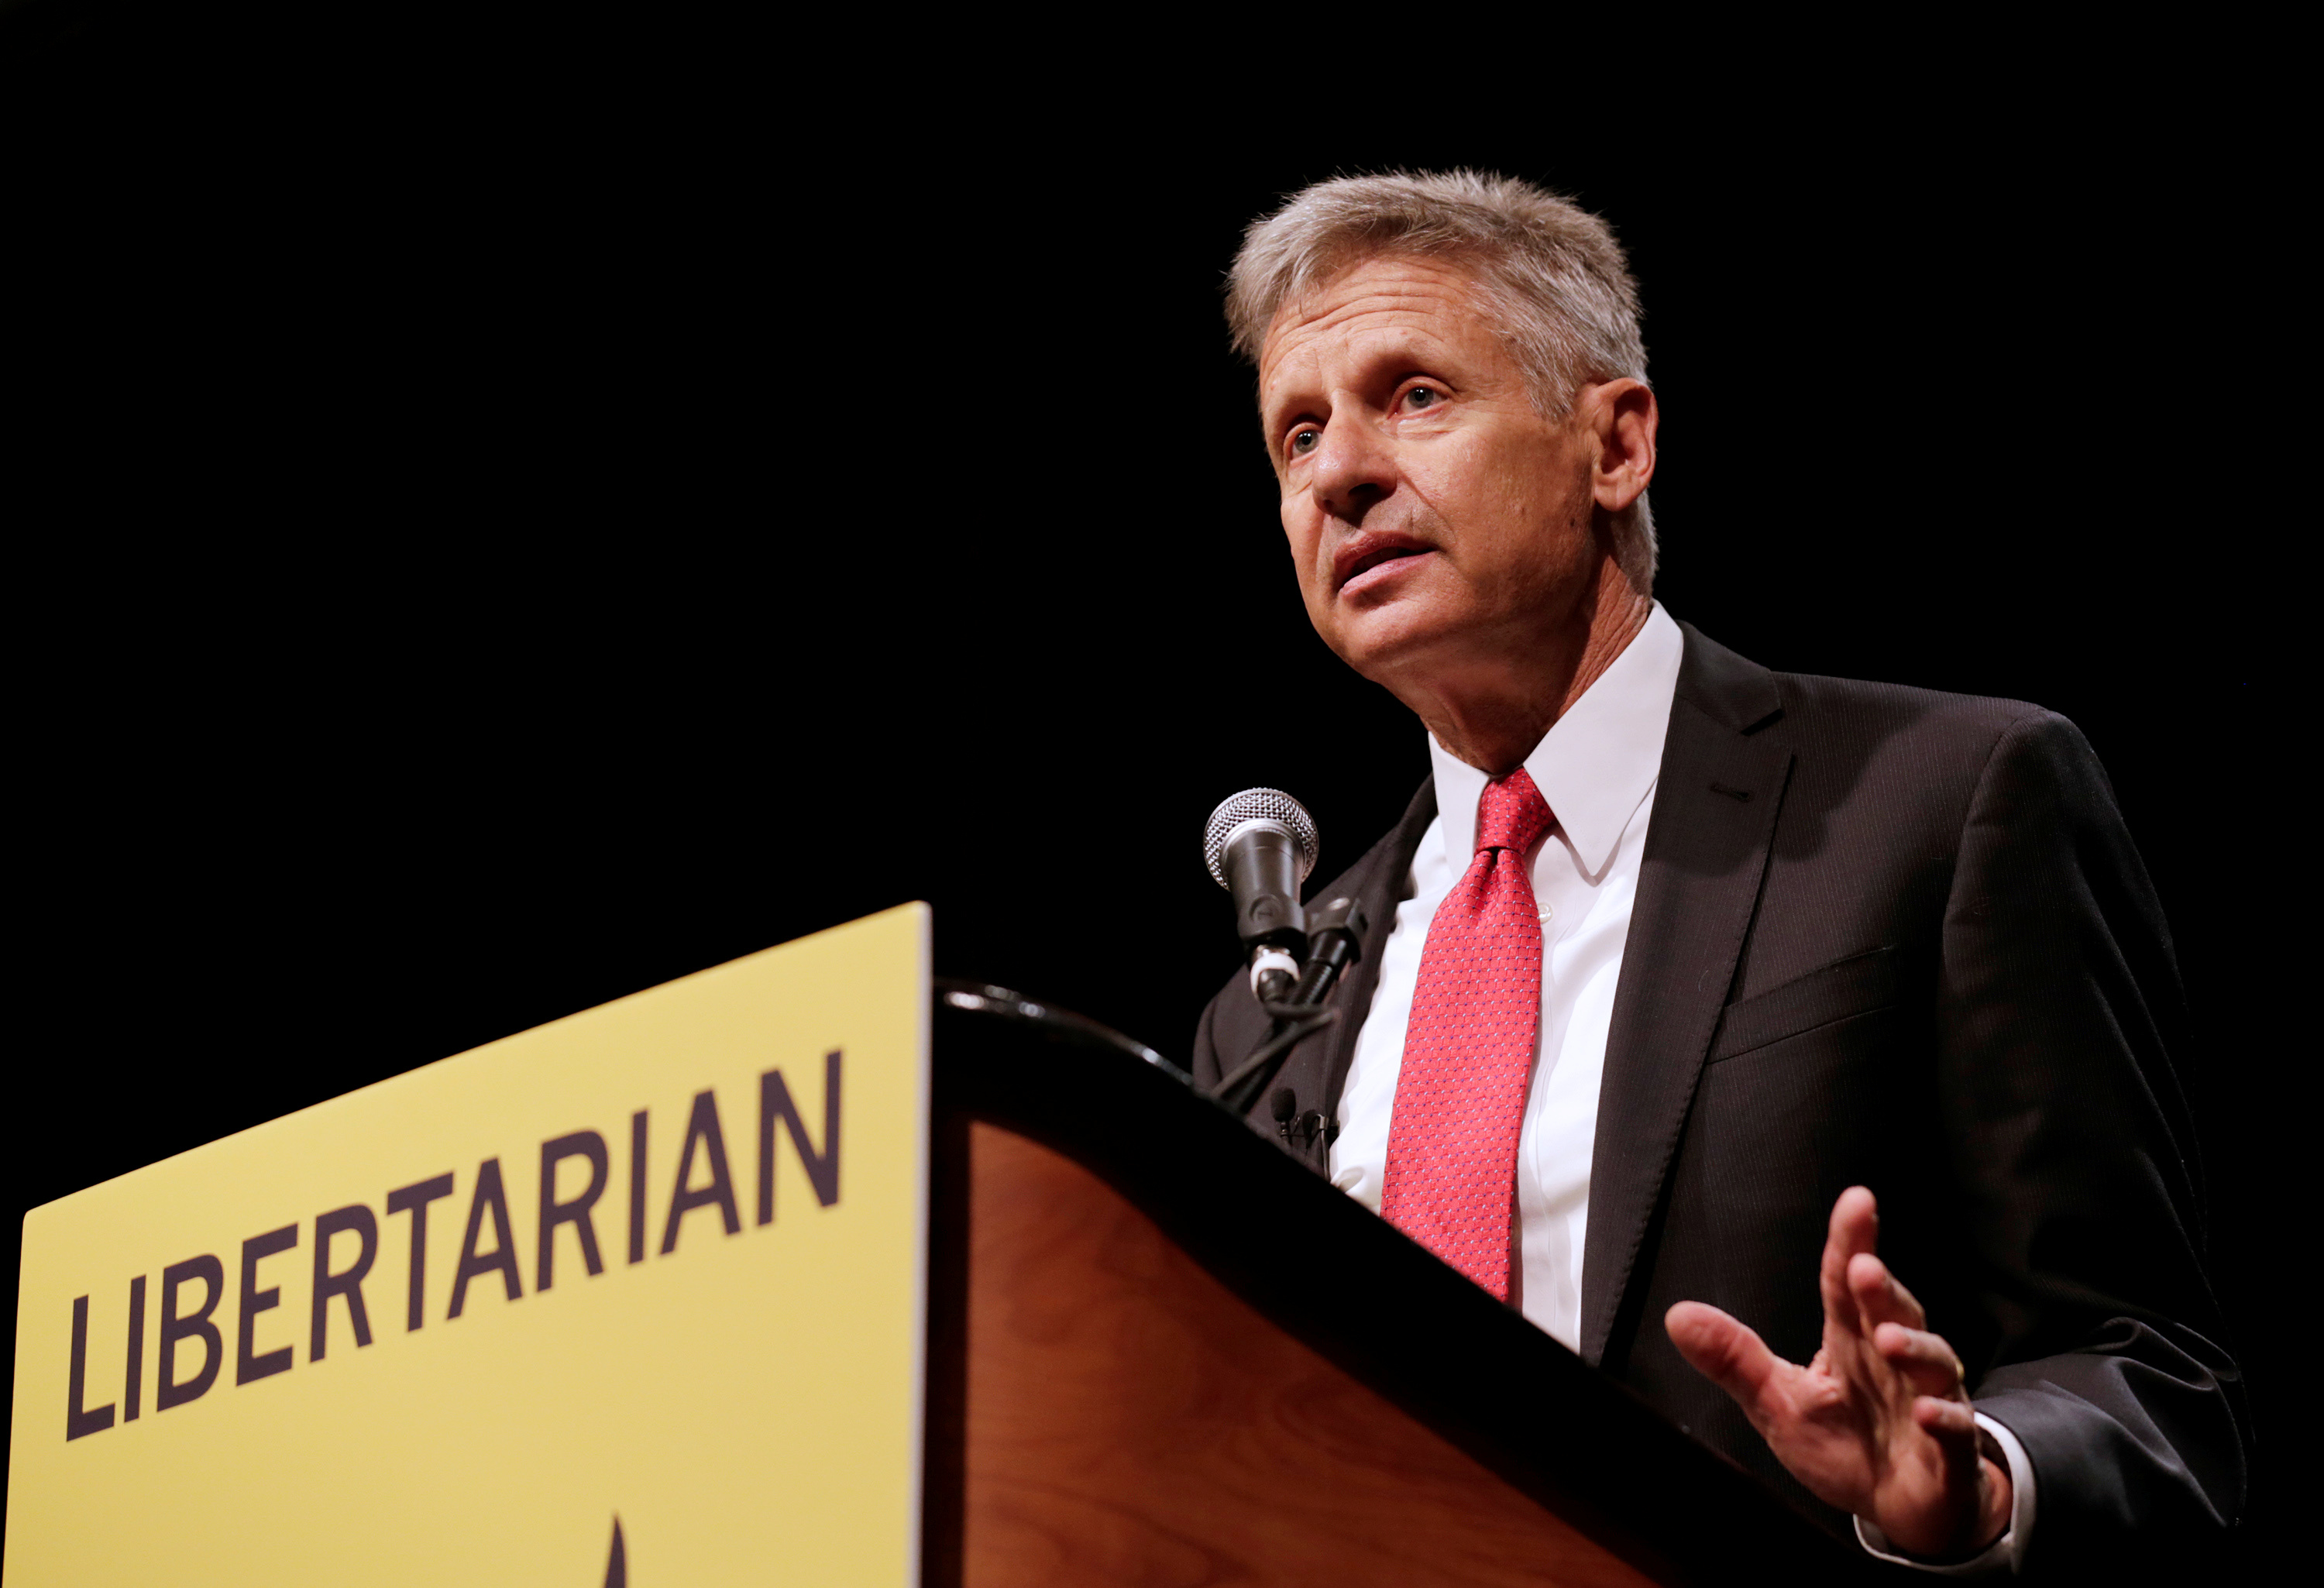 Libertarian Party presidential candidate Gary Johnson gives acceptance speech during National Convention held at the Rosen Centre in Orlando, Florida